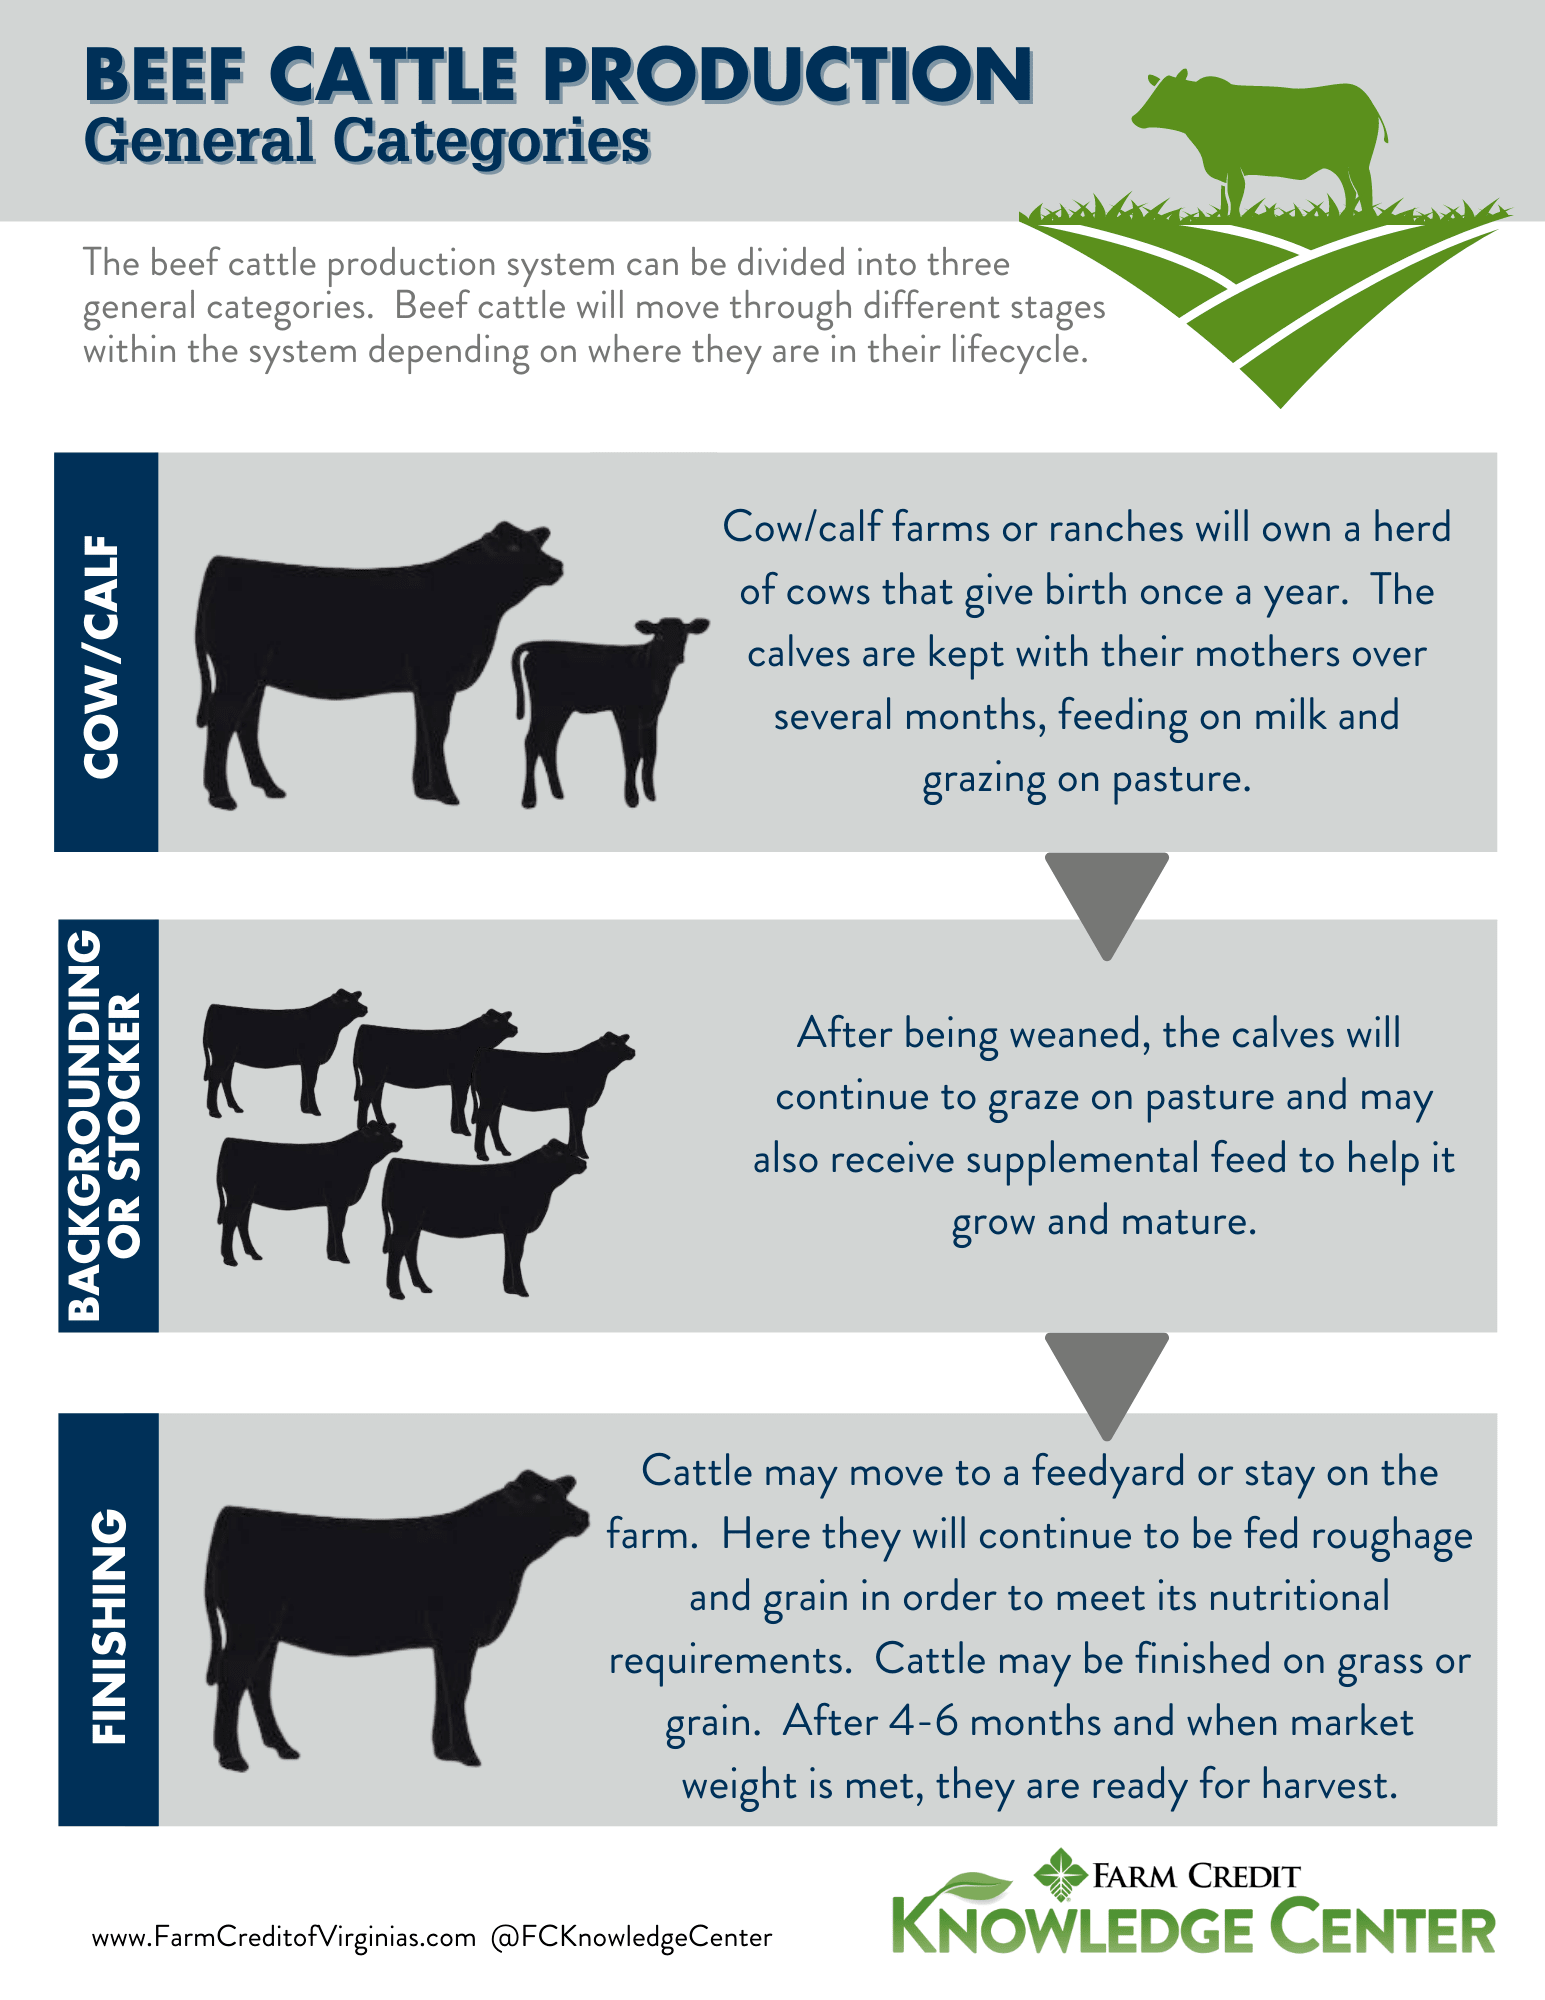 Beef Cattle Production And Lifecycle | Farm Credit Of The Virginias